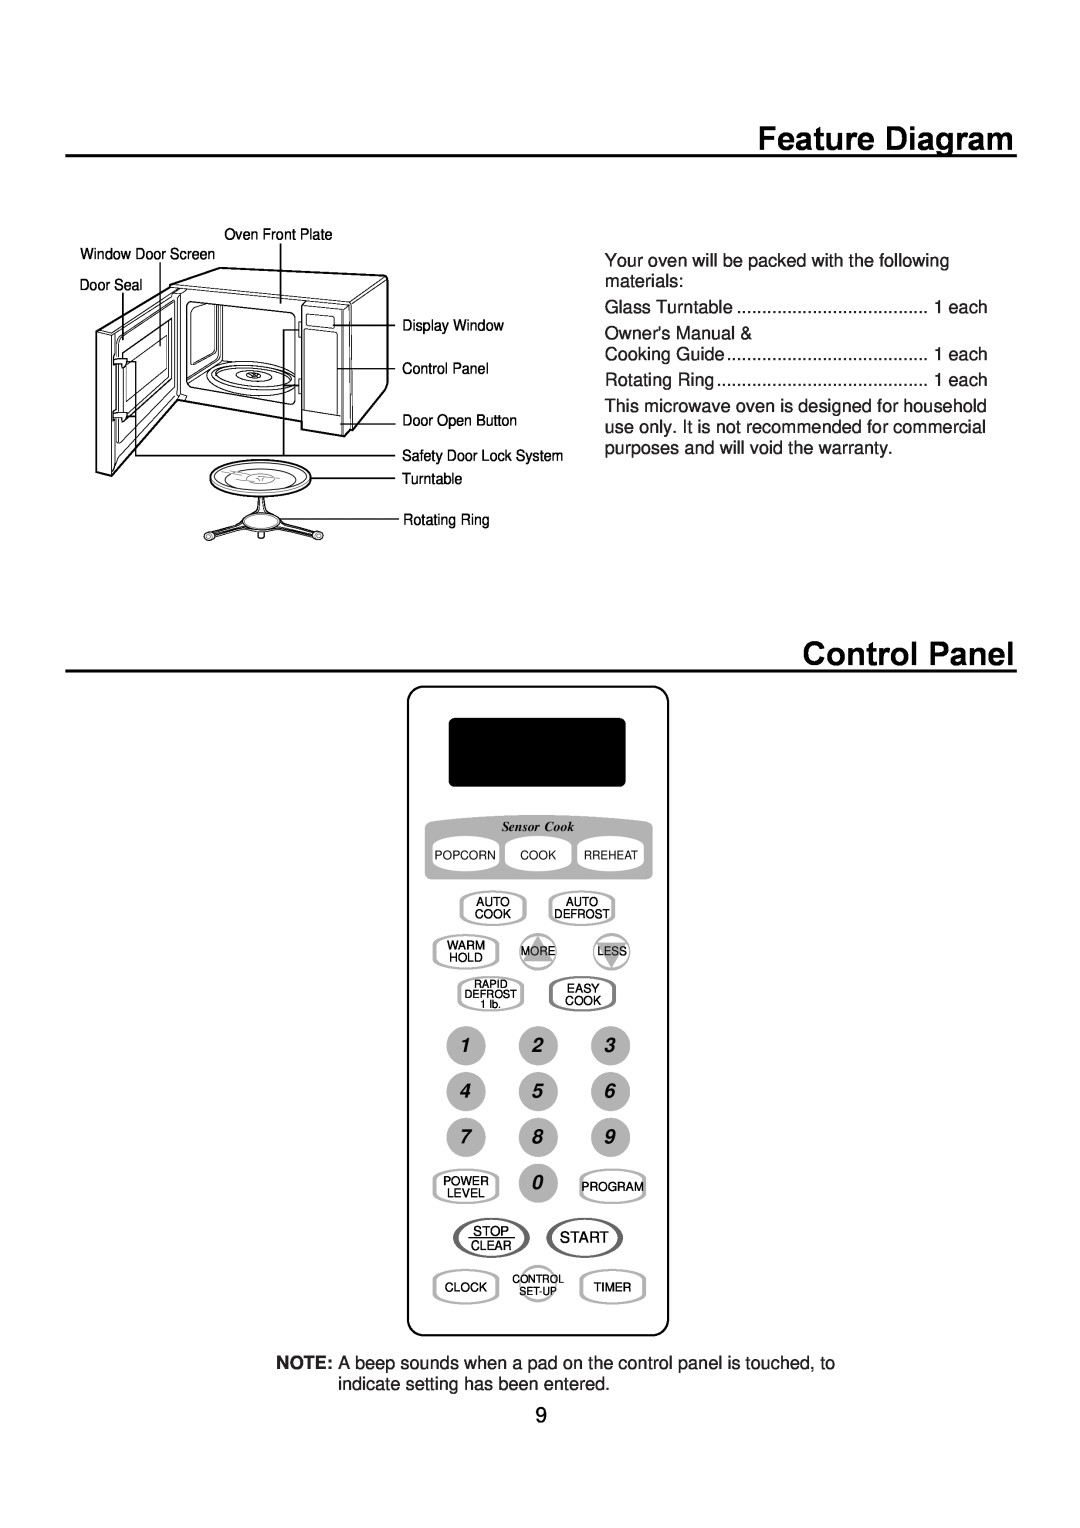 Amana ACM1460A, ACM2160A Feature Diagram, Control Panel, 1 2 4 5, Glass Turntable, Cooking Guide, Rotating Ring 